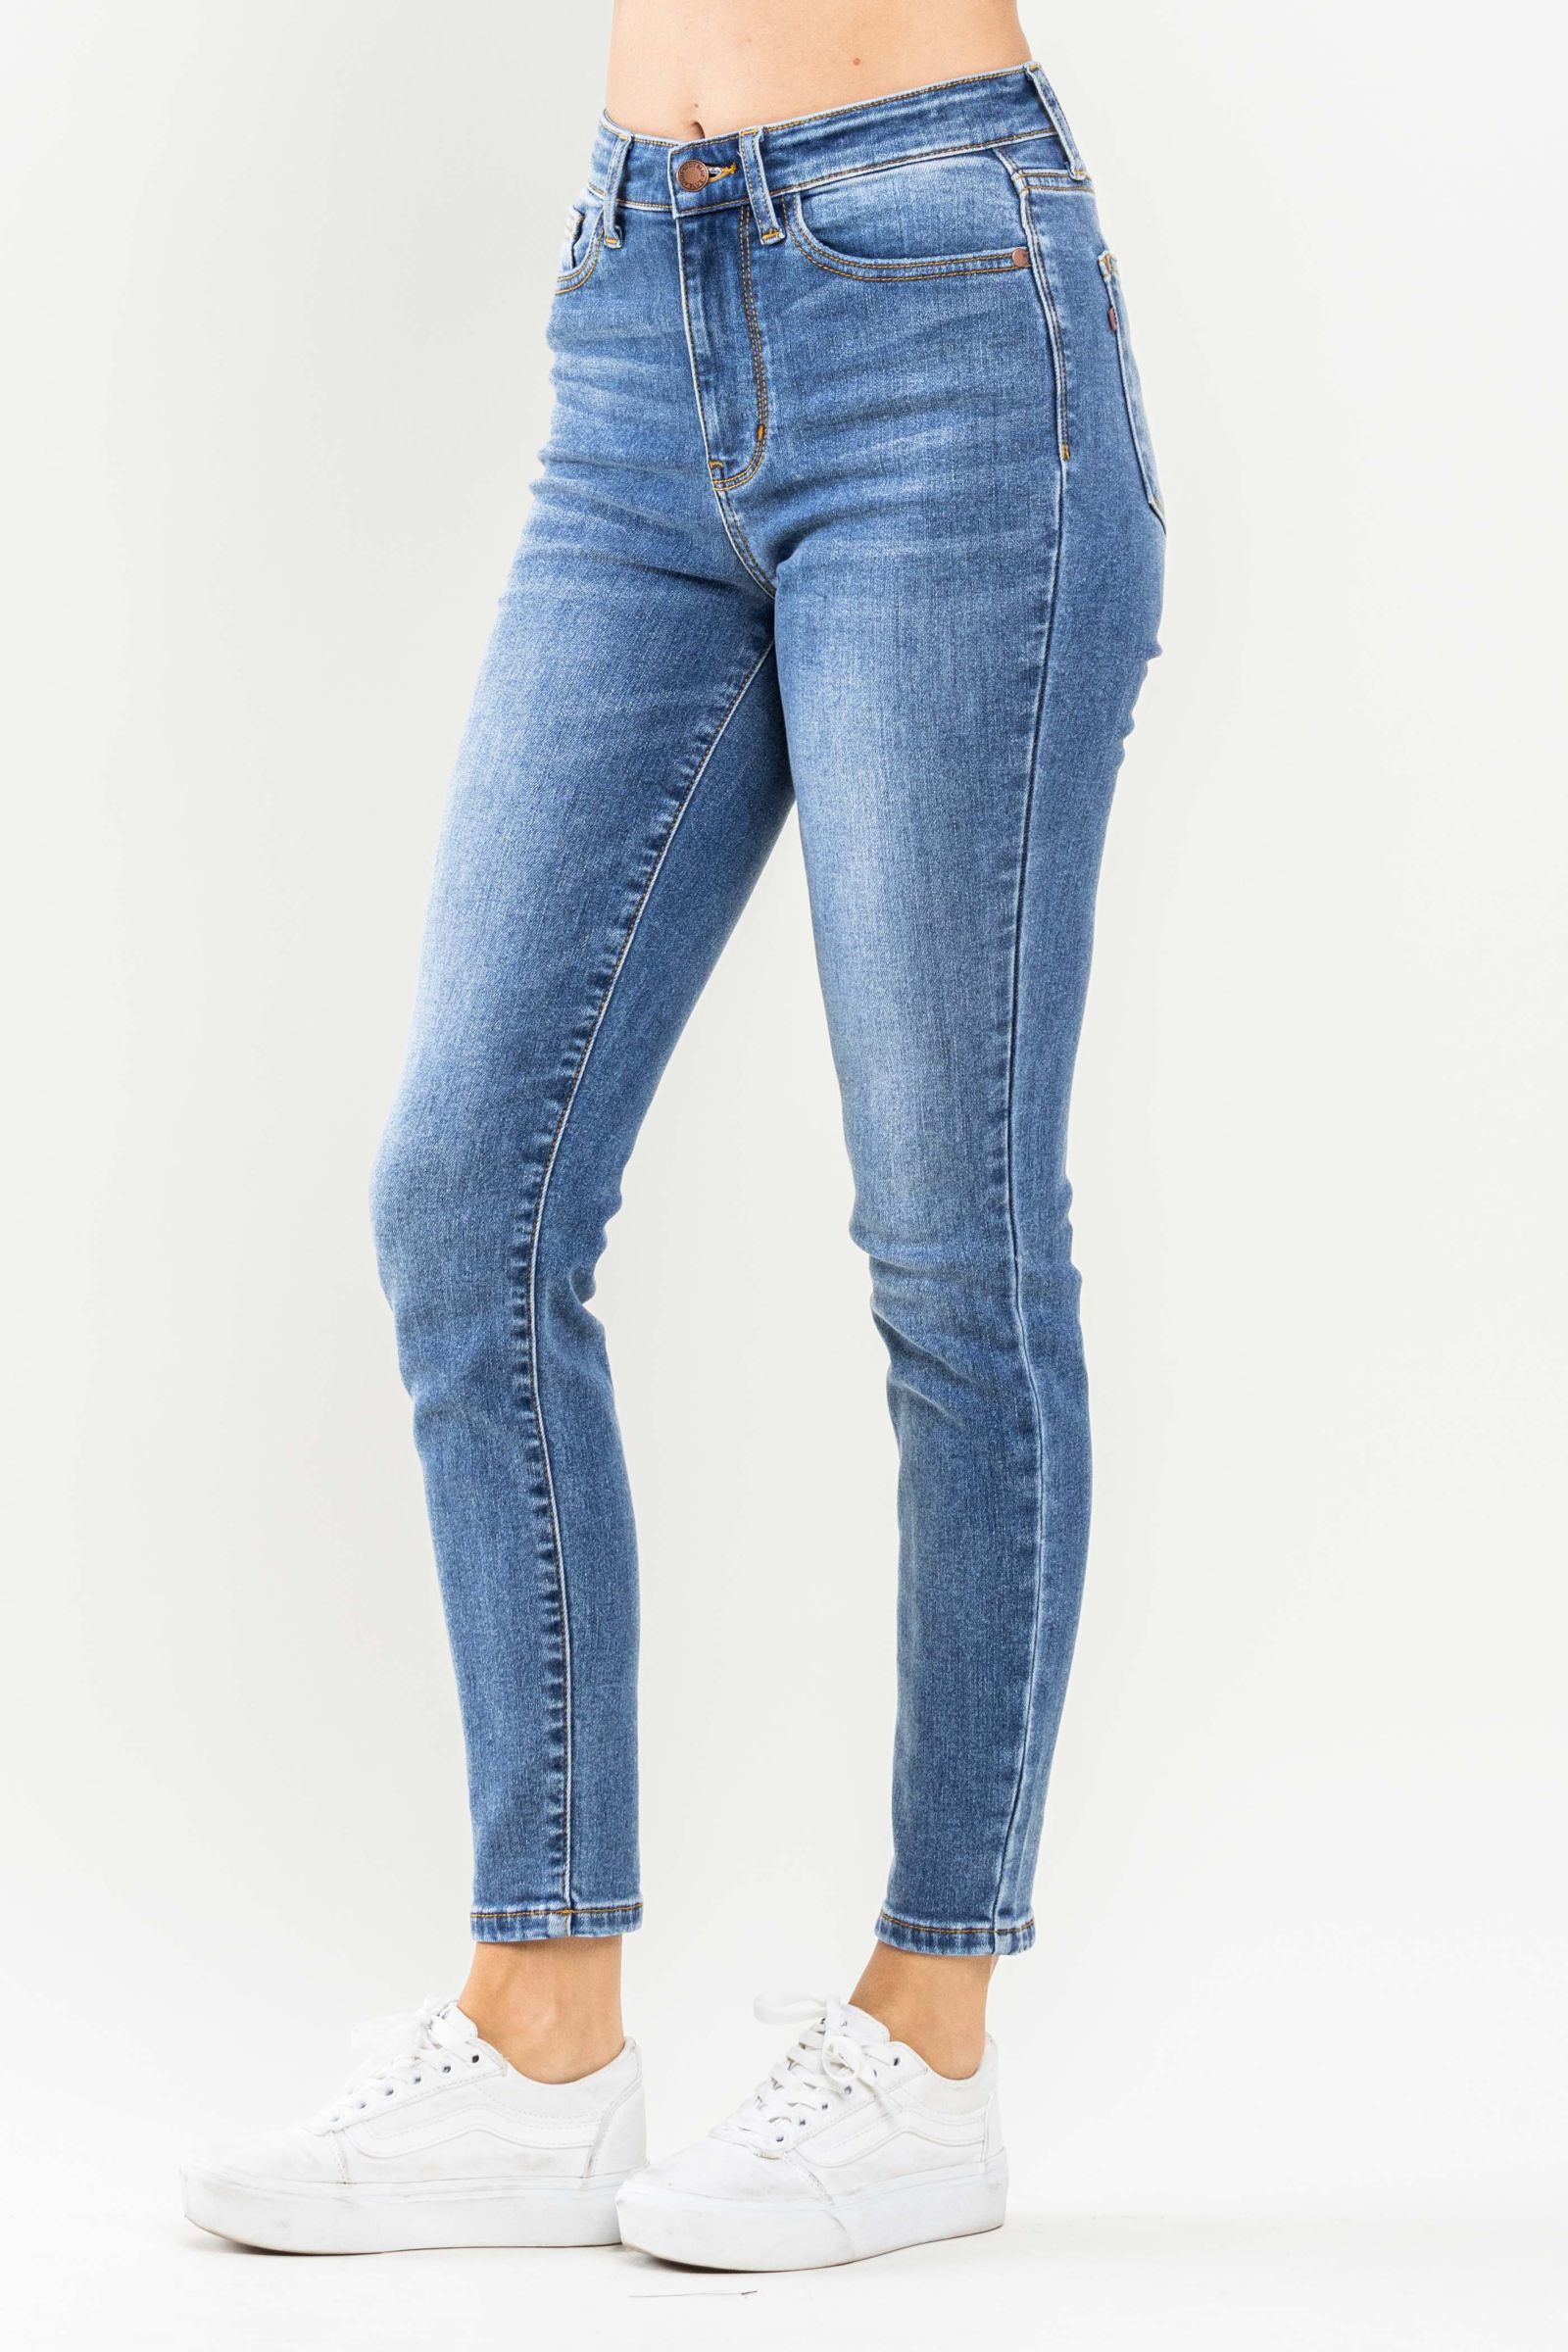 Judy Blue High Waist Classic Thermal Skinny Jeans